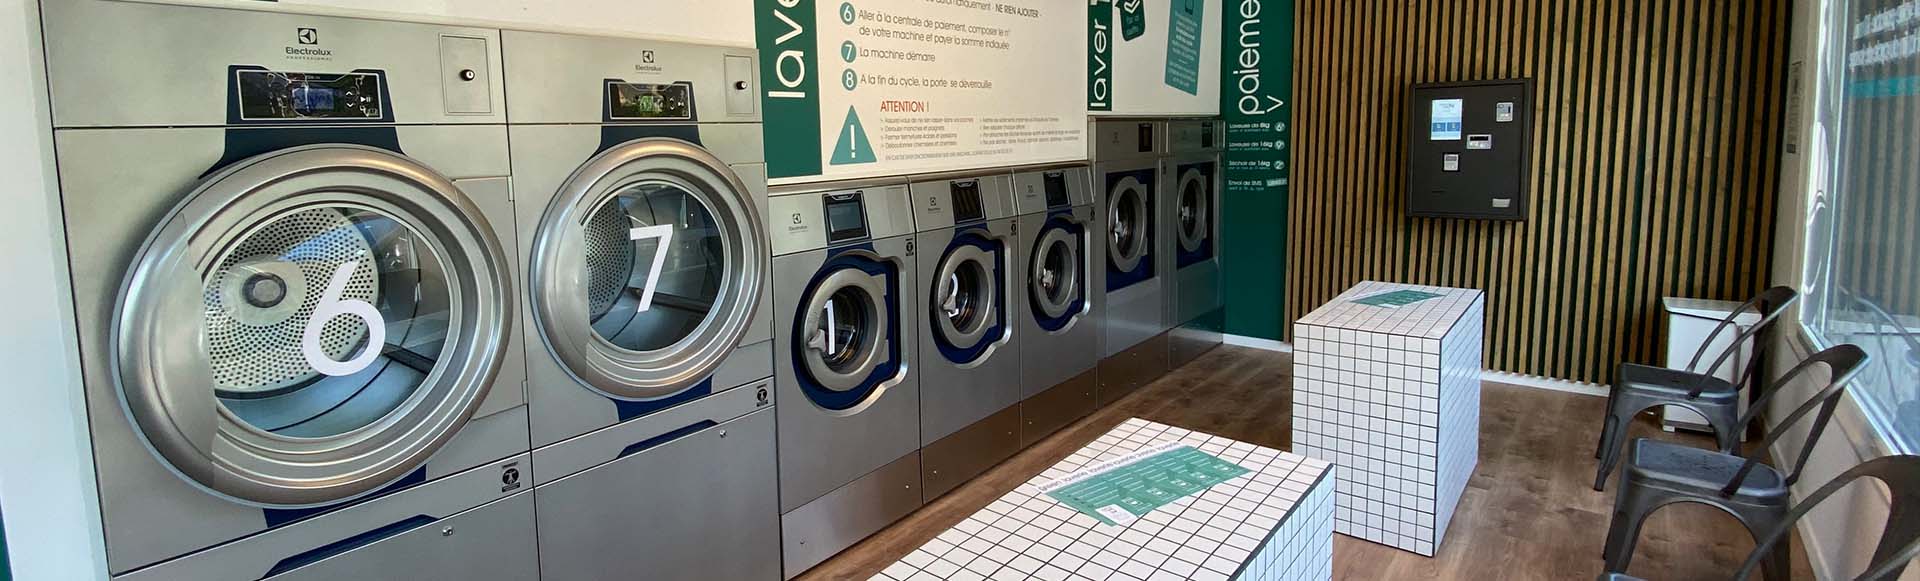 Modern laundromat interior with a row of Electrolux washing machines and a comfortable seating area